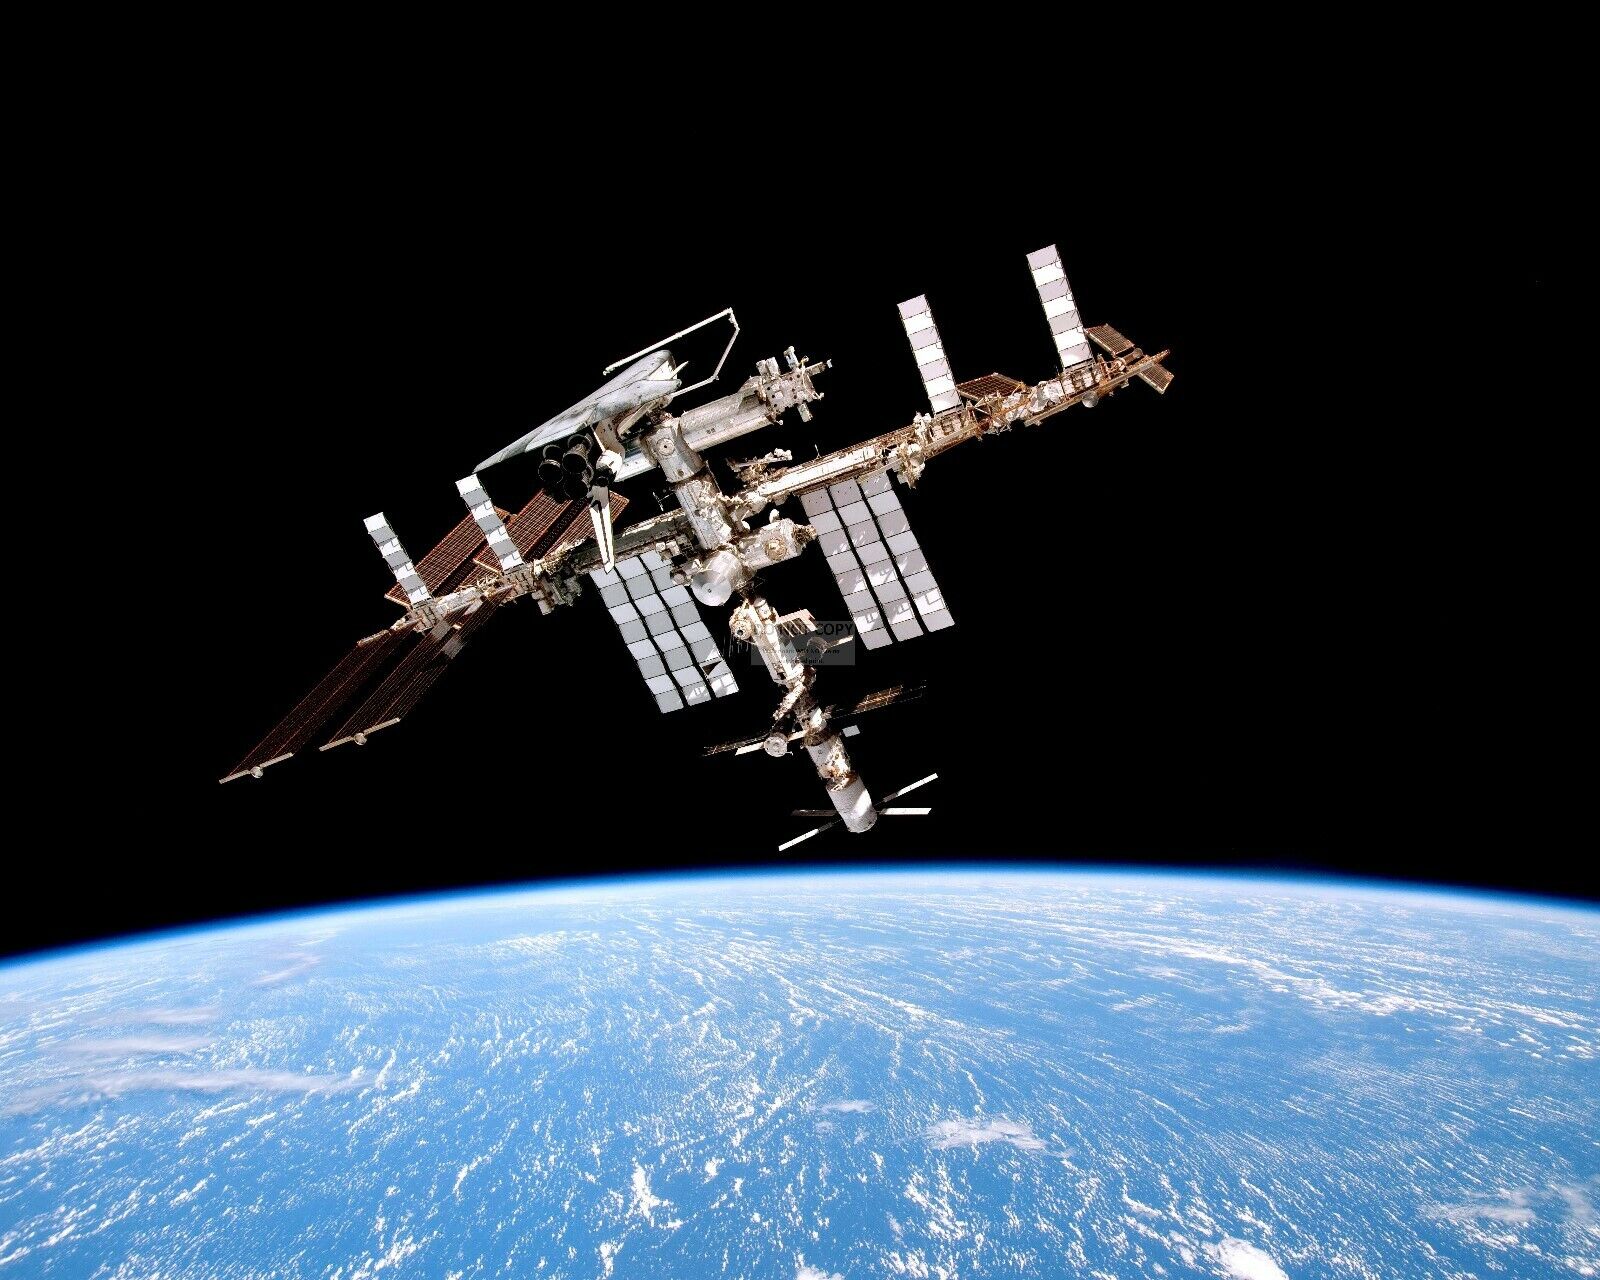 SHUTTLE ENDEAVOUR DOCKED TO INTERNATIONAL SPACE STATION  8X10 NASA PHOTO (DD669)